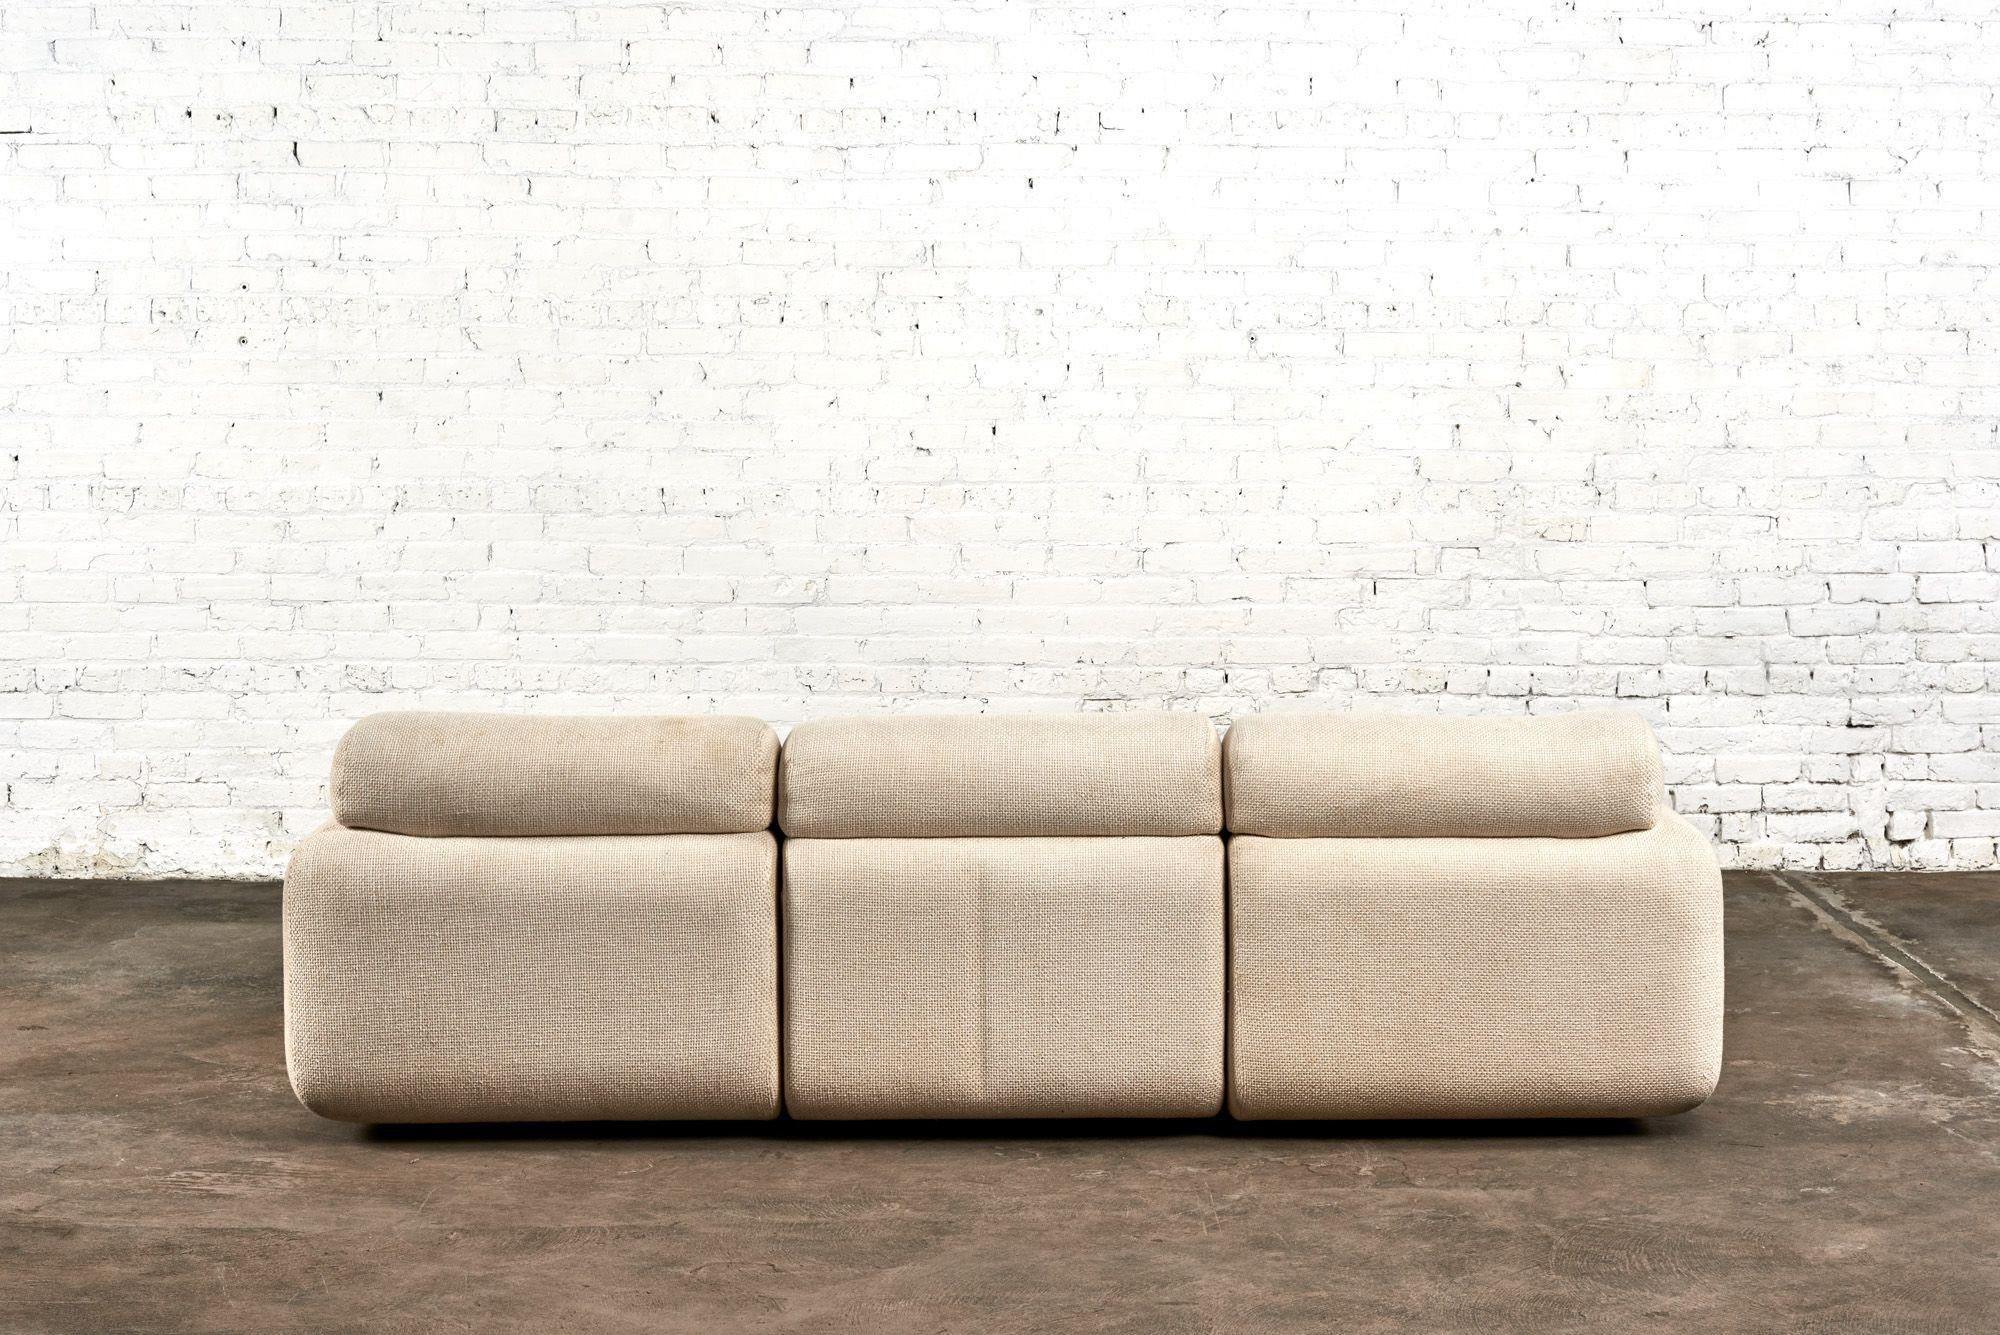 Late 20th Century Vladimir Kagan for Preview 3 Piece Sectional Sofa, 1987 For Sale